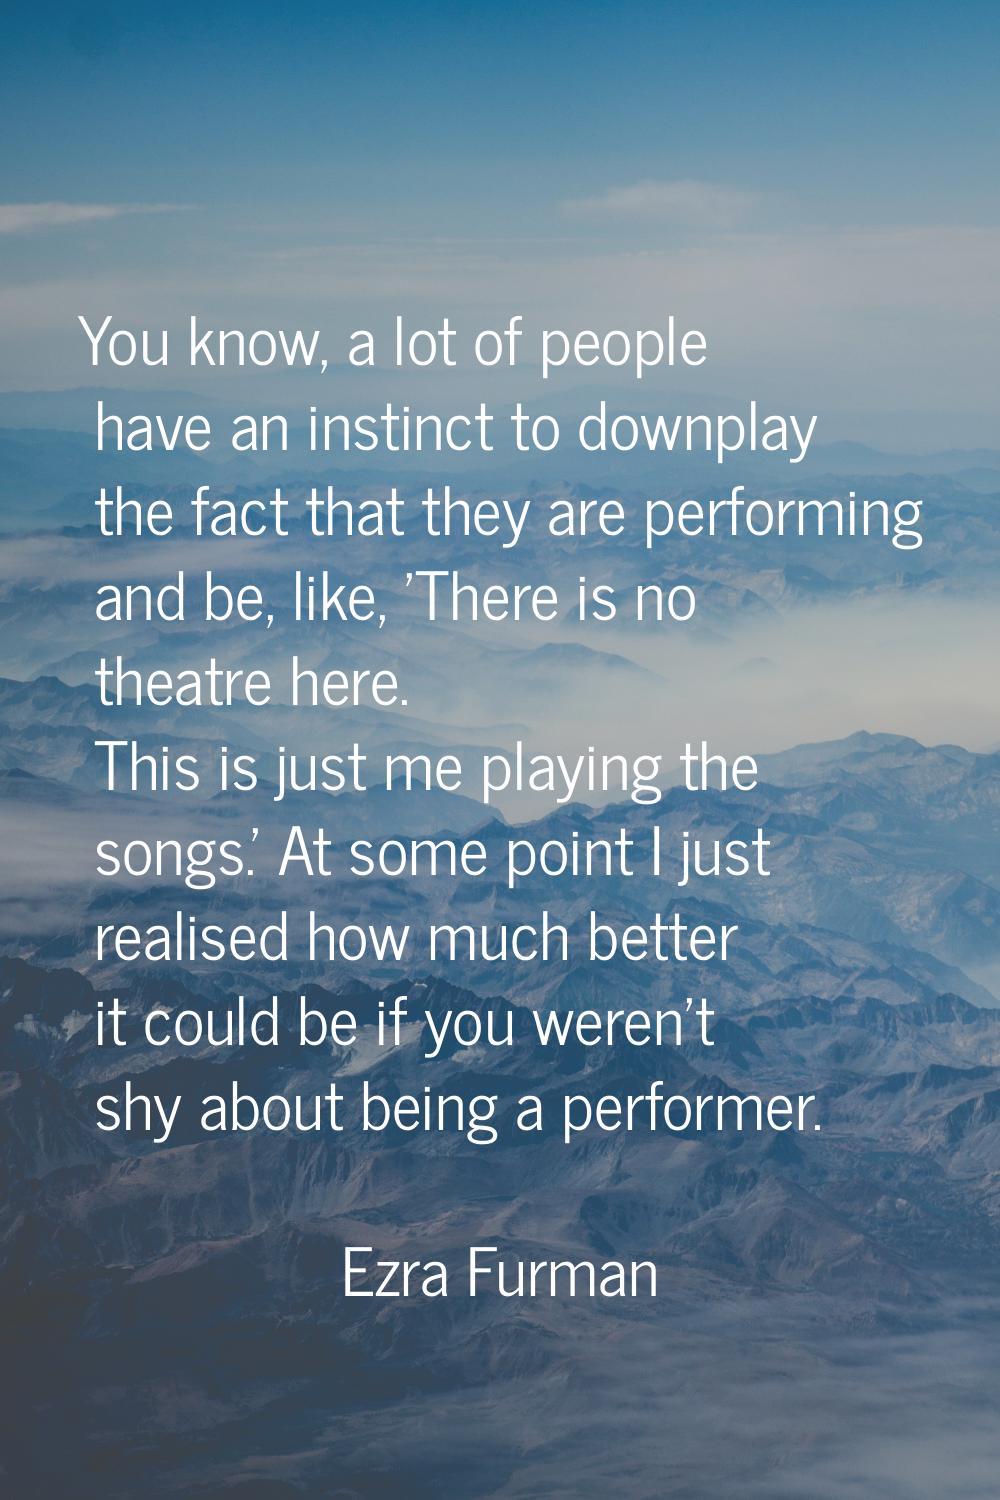 You know, a lot of people have an instinct to downplay the fact that they are performing and be, li